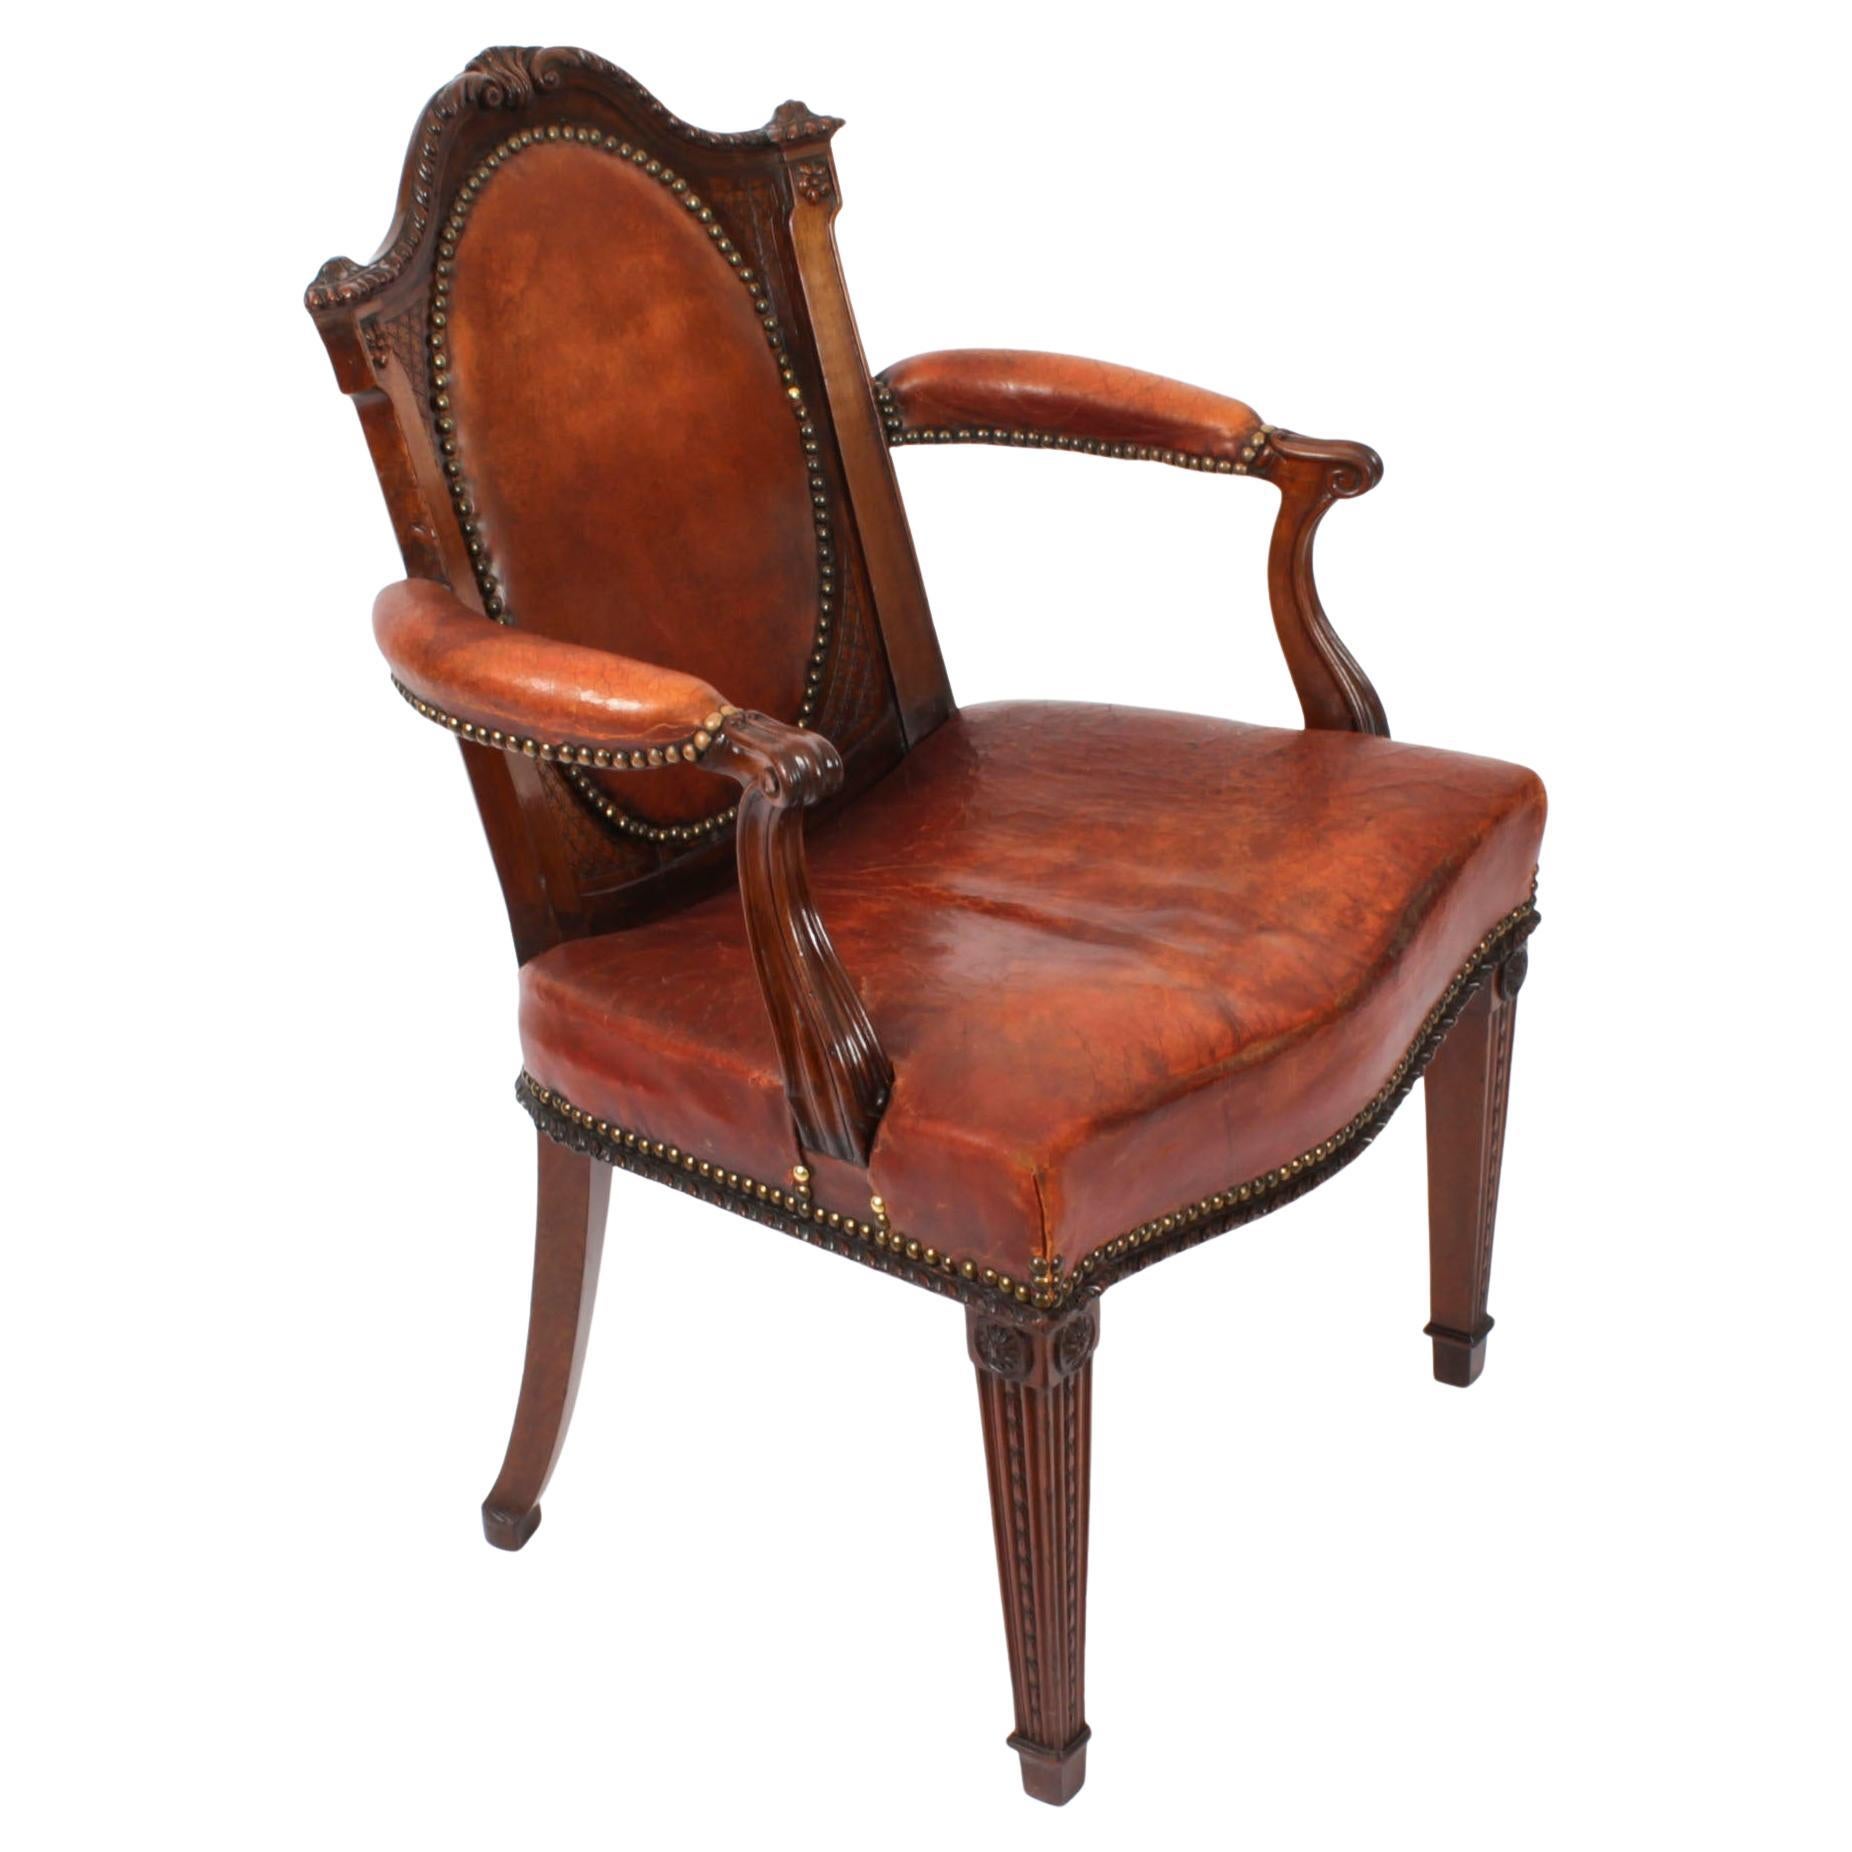 Antique Victorian Mahogany & Leather Armchair 19th Century